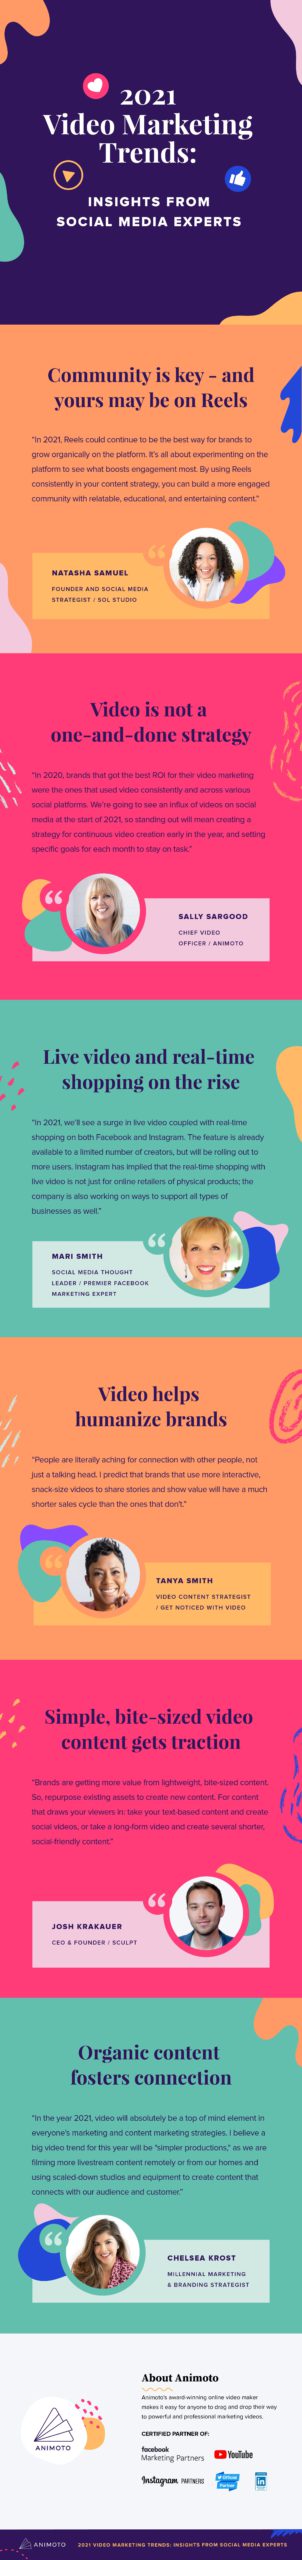 2021 video marketing insights from social media experts infographic scaled 1